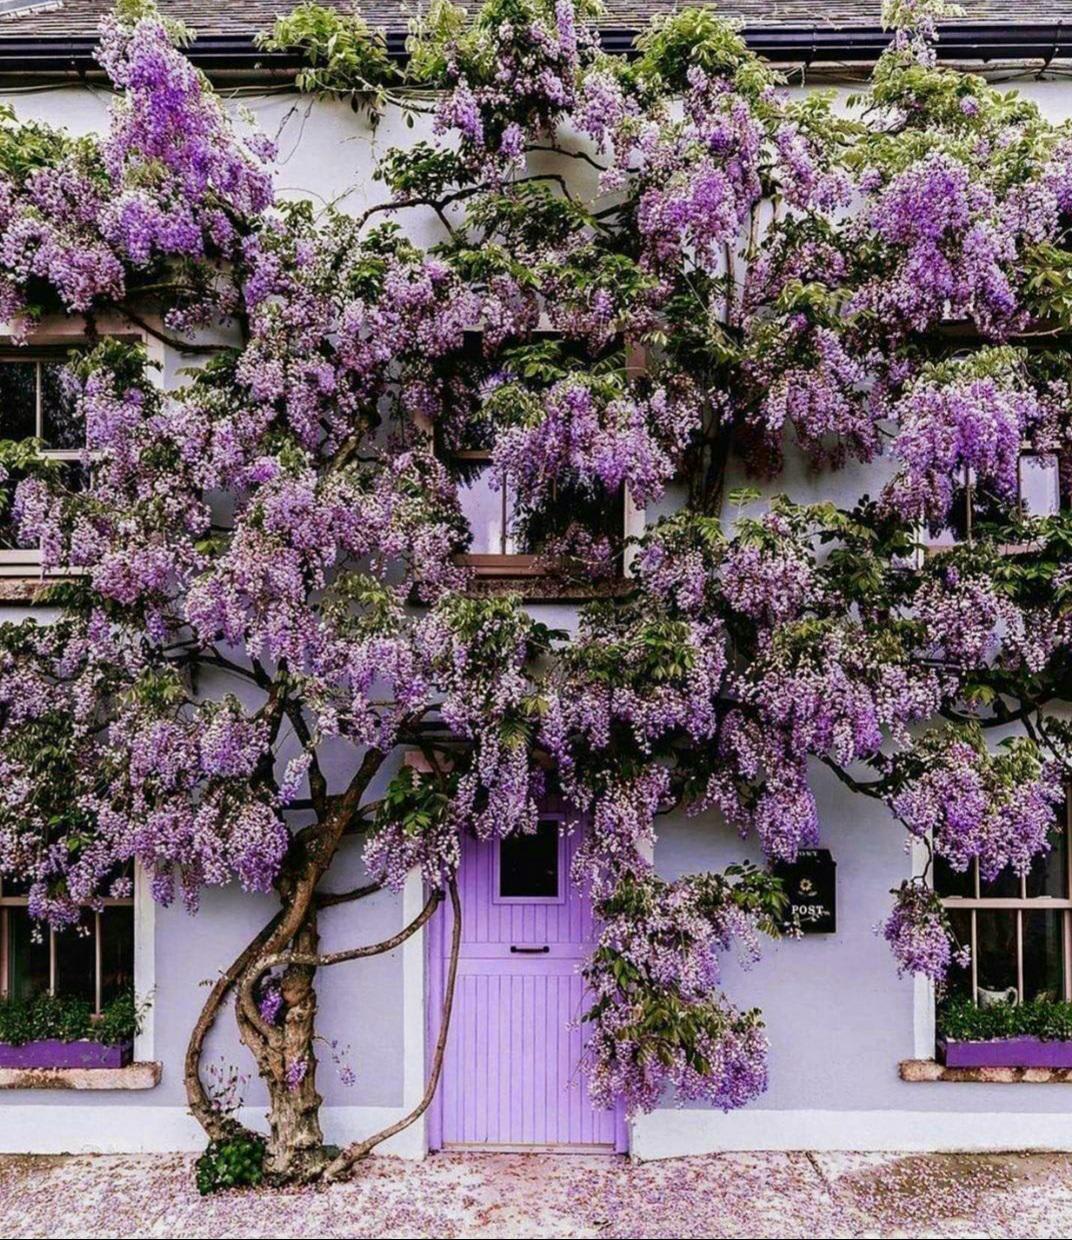 A cottage covered in wisteria in the village of Inistioge, Kilkenny, Ireland.